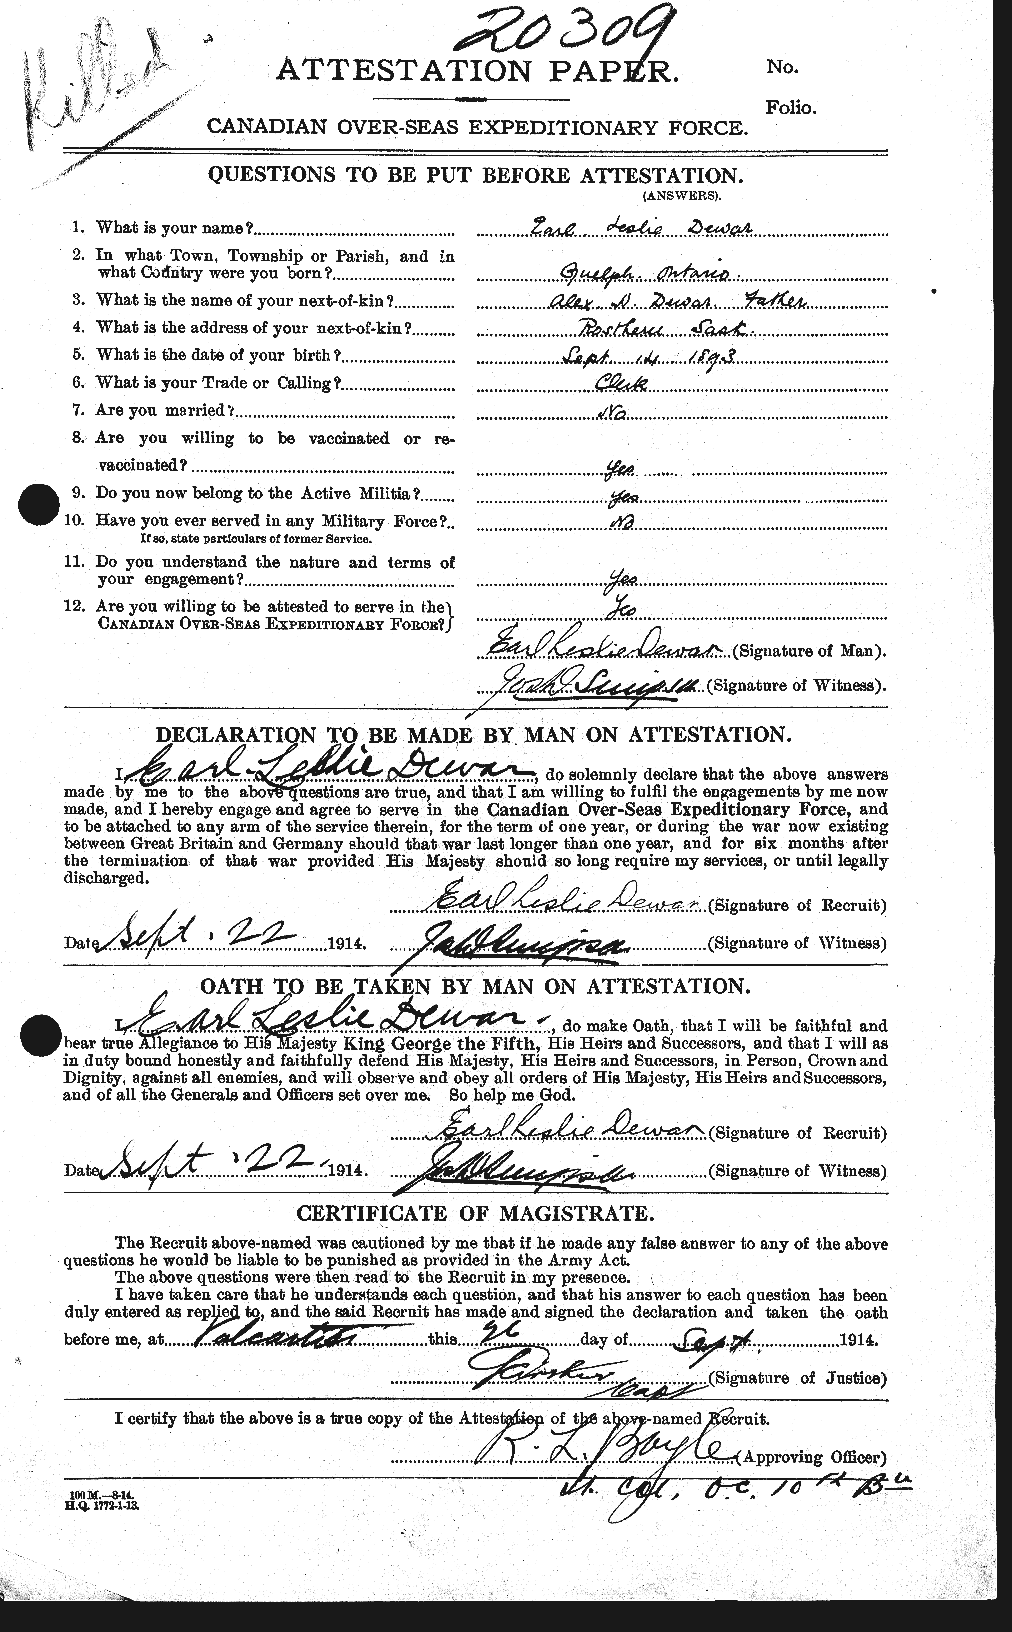 Personnel Records of the First World War - CEF 288600a